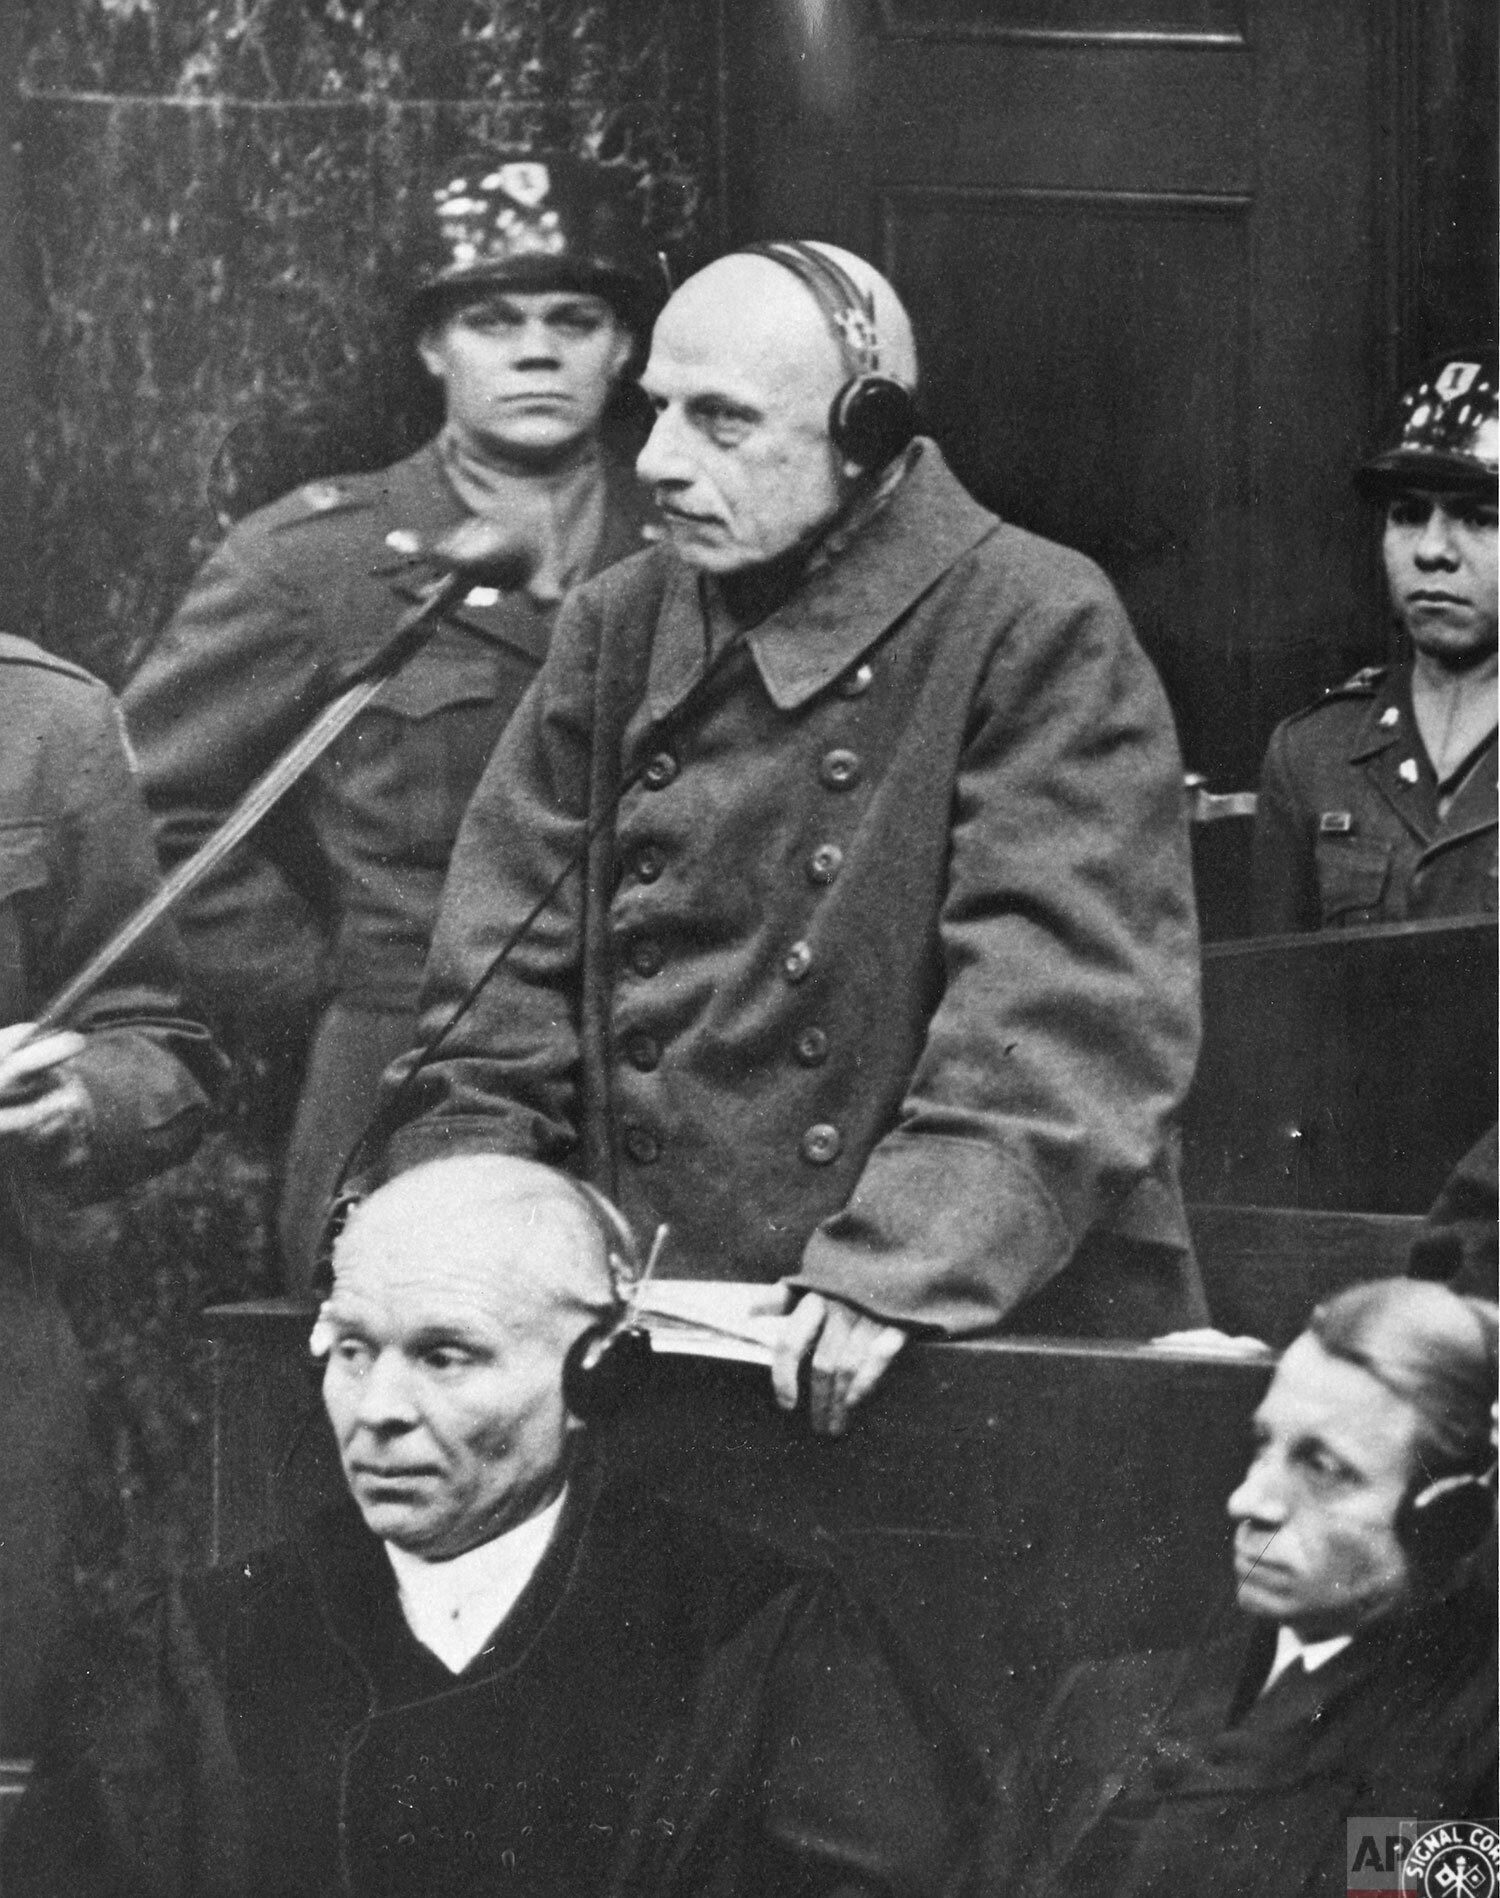  Defendant German Fieldmarshal Wilhelm Leeb  pleads not guilty during the Nuremberg Trials, Case 12,  in the courthouse in Nuremberg, Germany, at the opening of the case against himself and other high ranking German officers during WW II December 30,